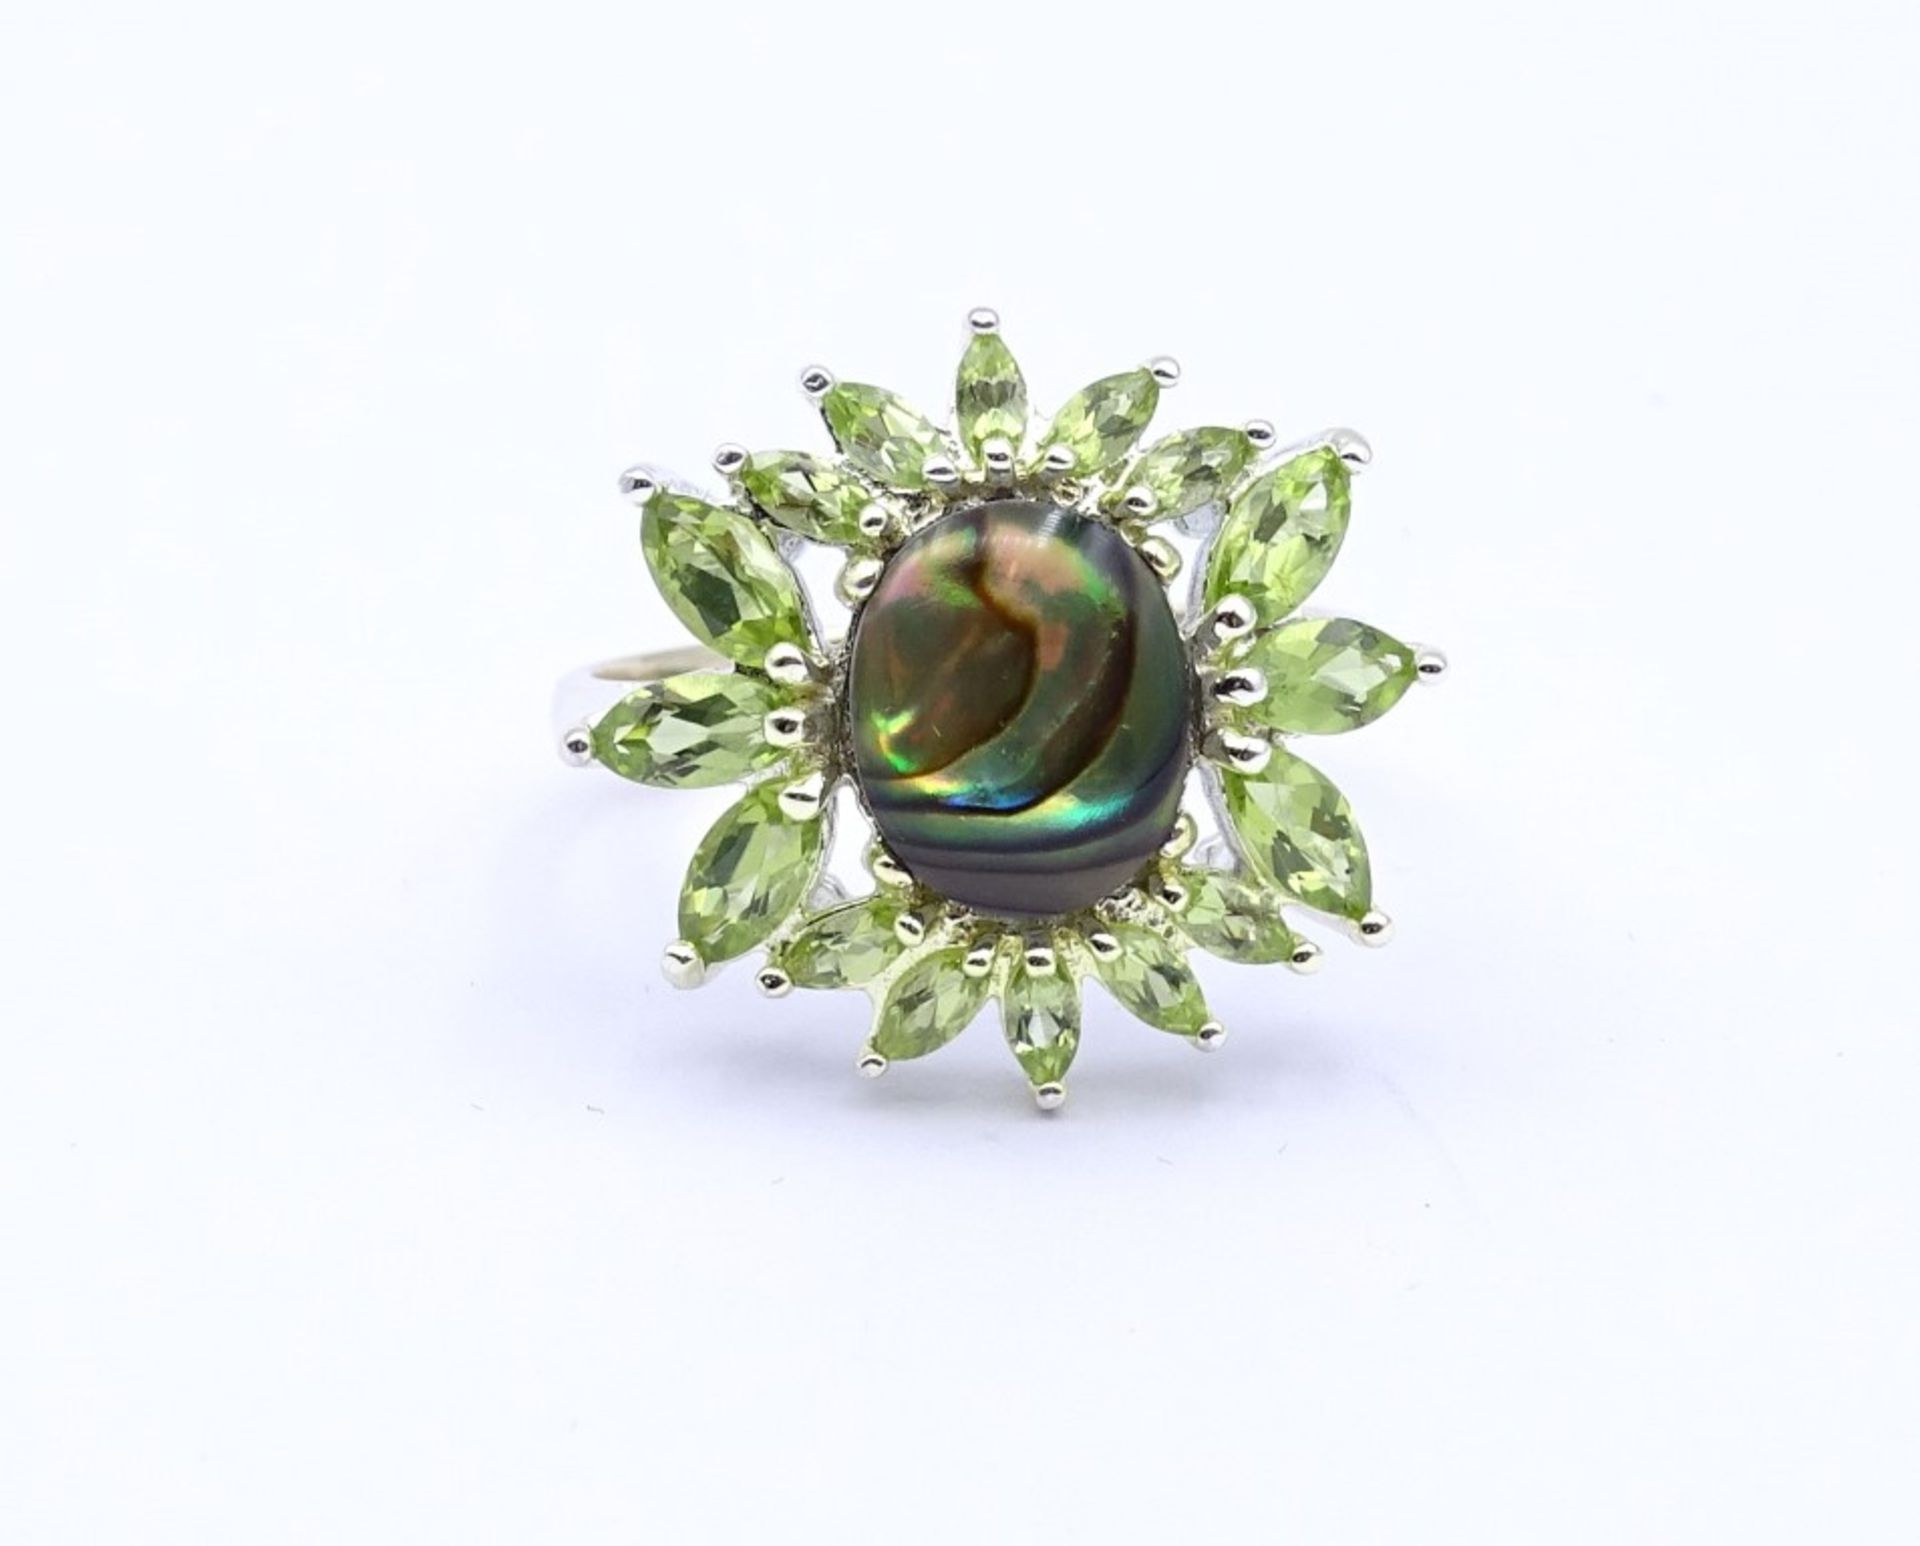 Silber Ring mit Peridots und Perlmutt,Sterling Silber 925/000,5,6gr., RG 63 - Image 2 of 3